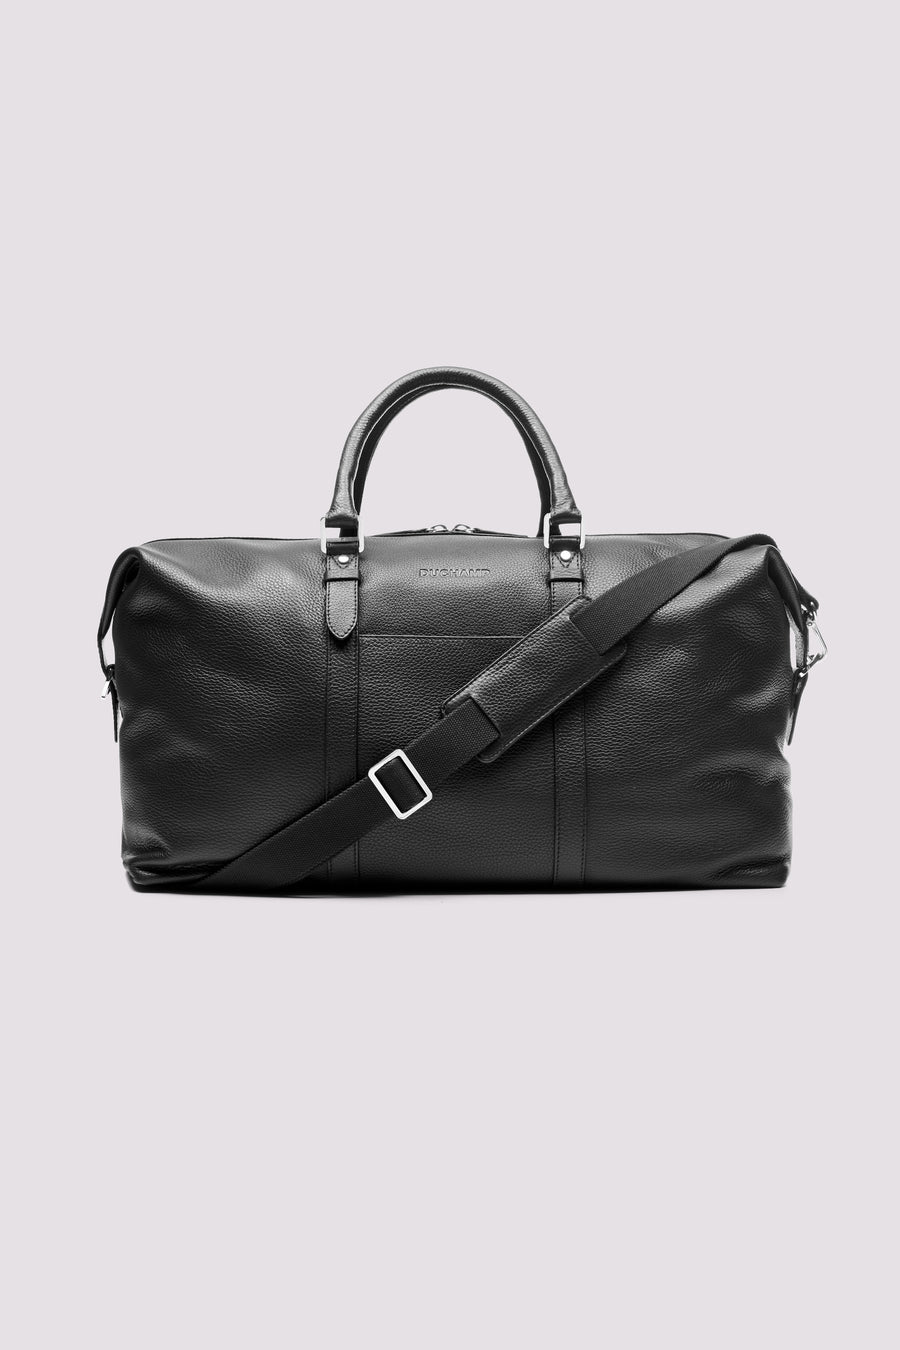 Weekend Leather in Holdall Black